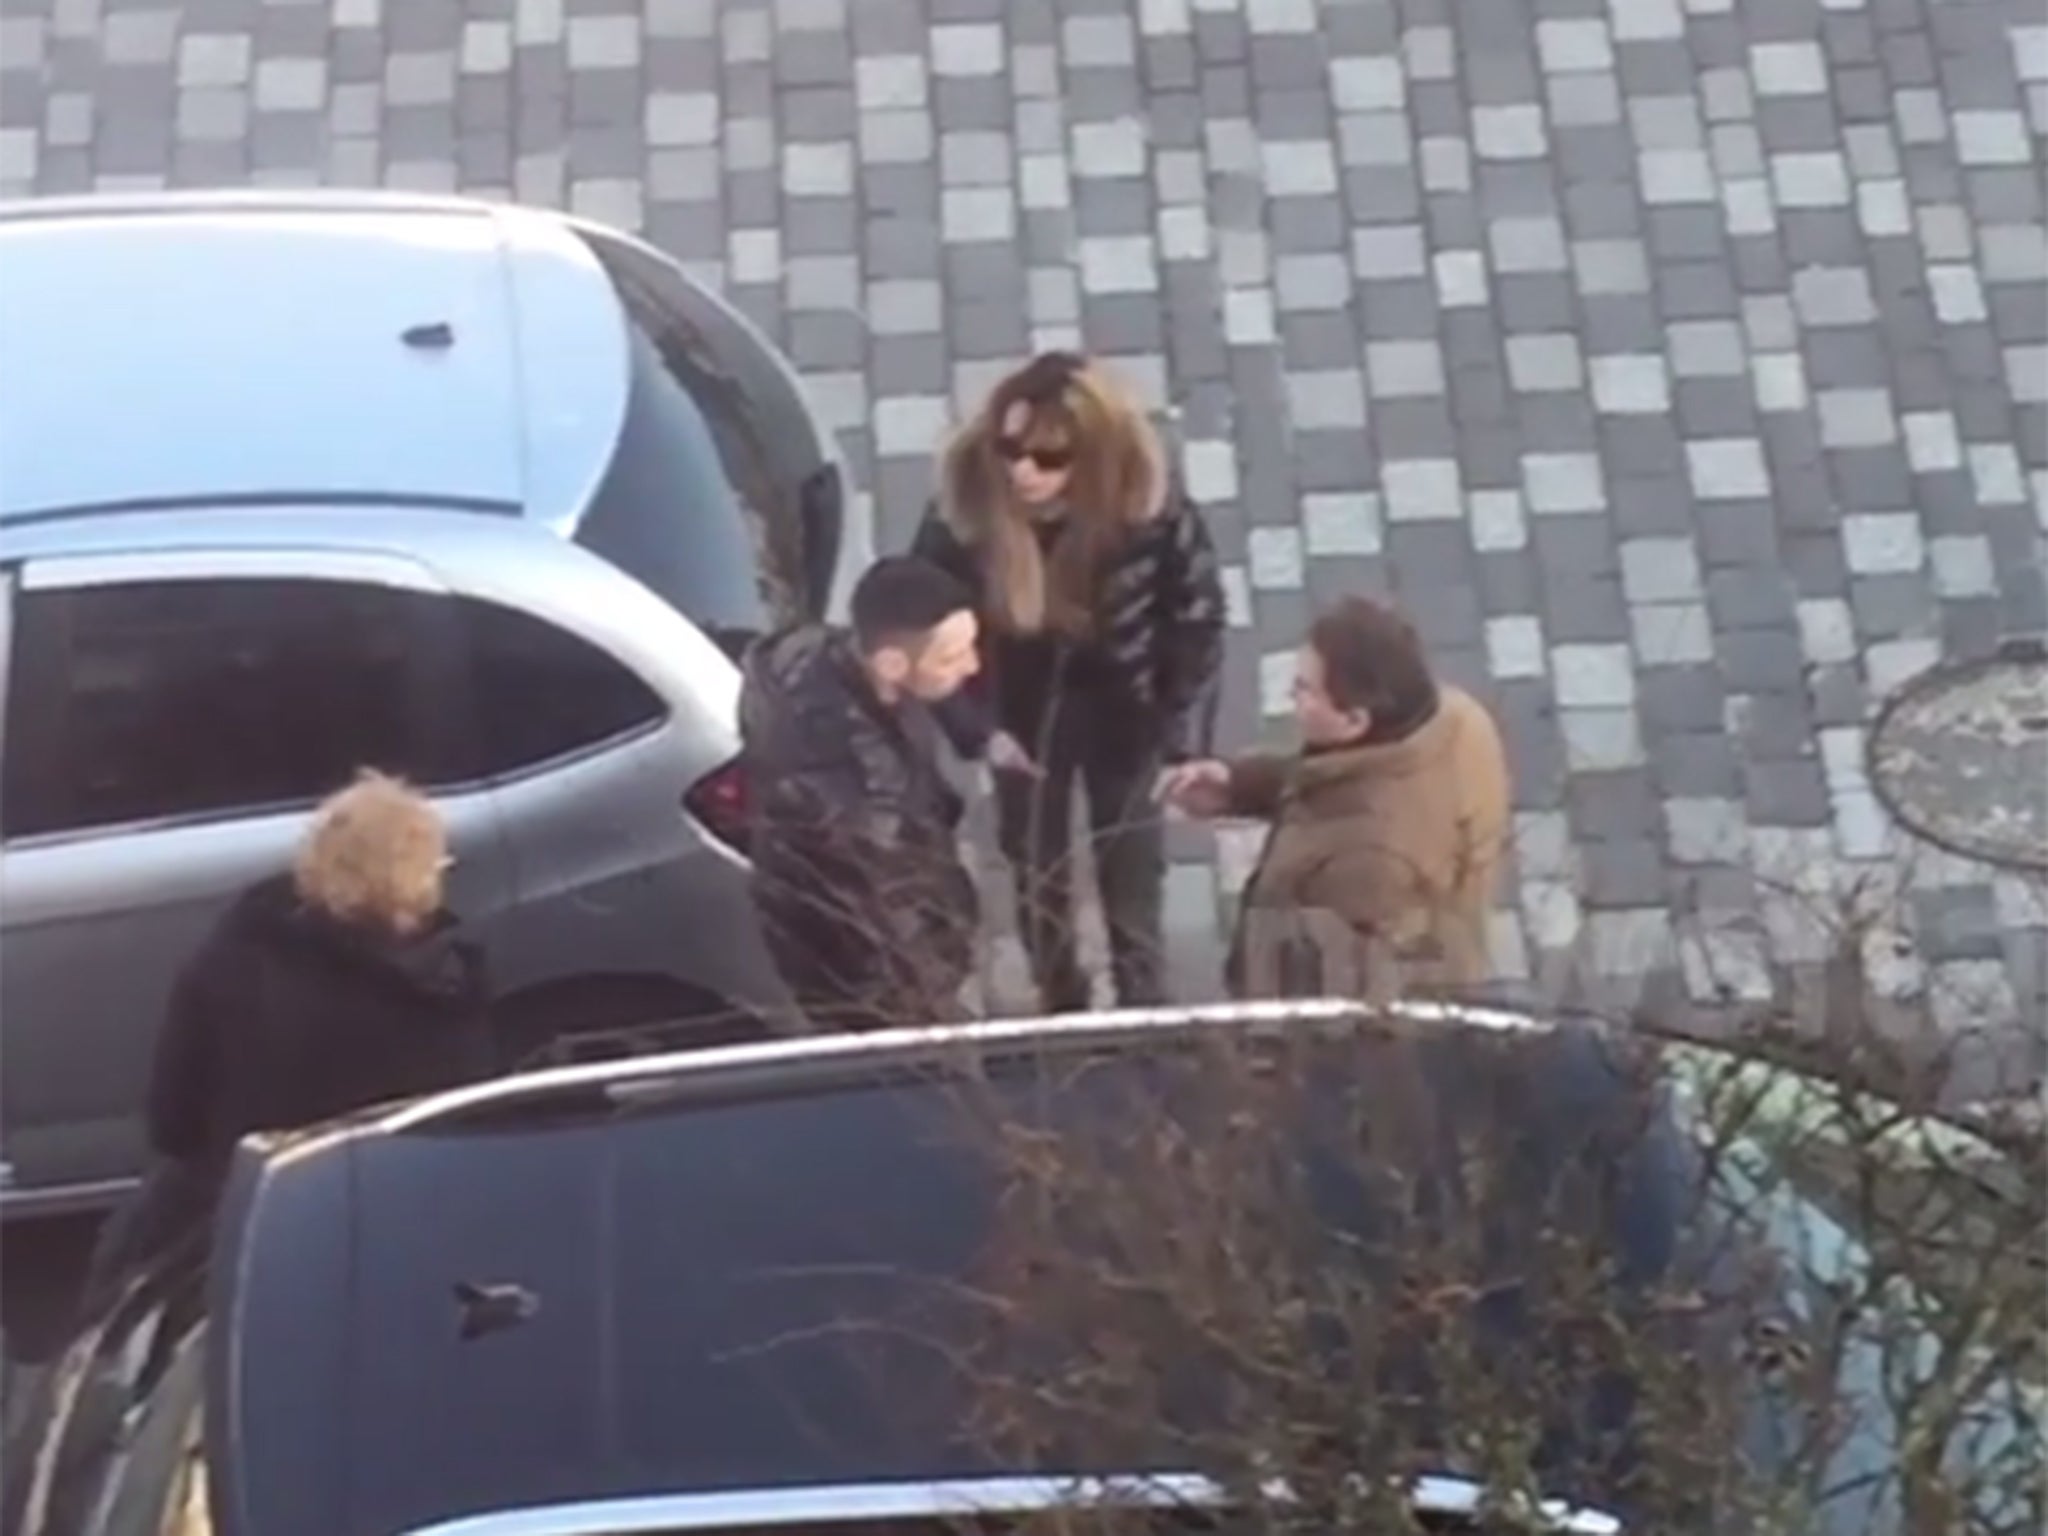 The two couple are involved in a heated dispute over the parking space